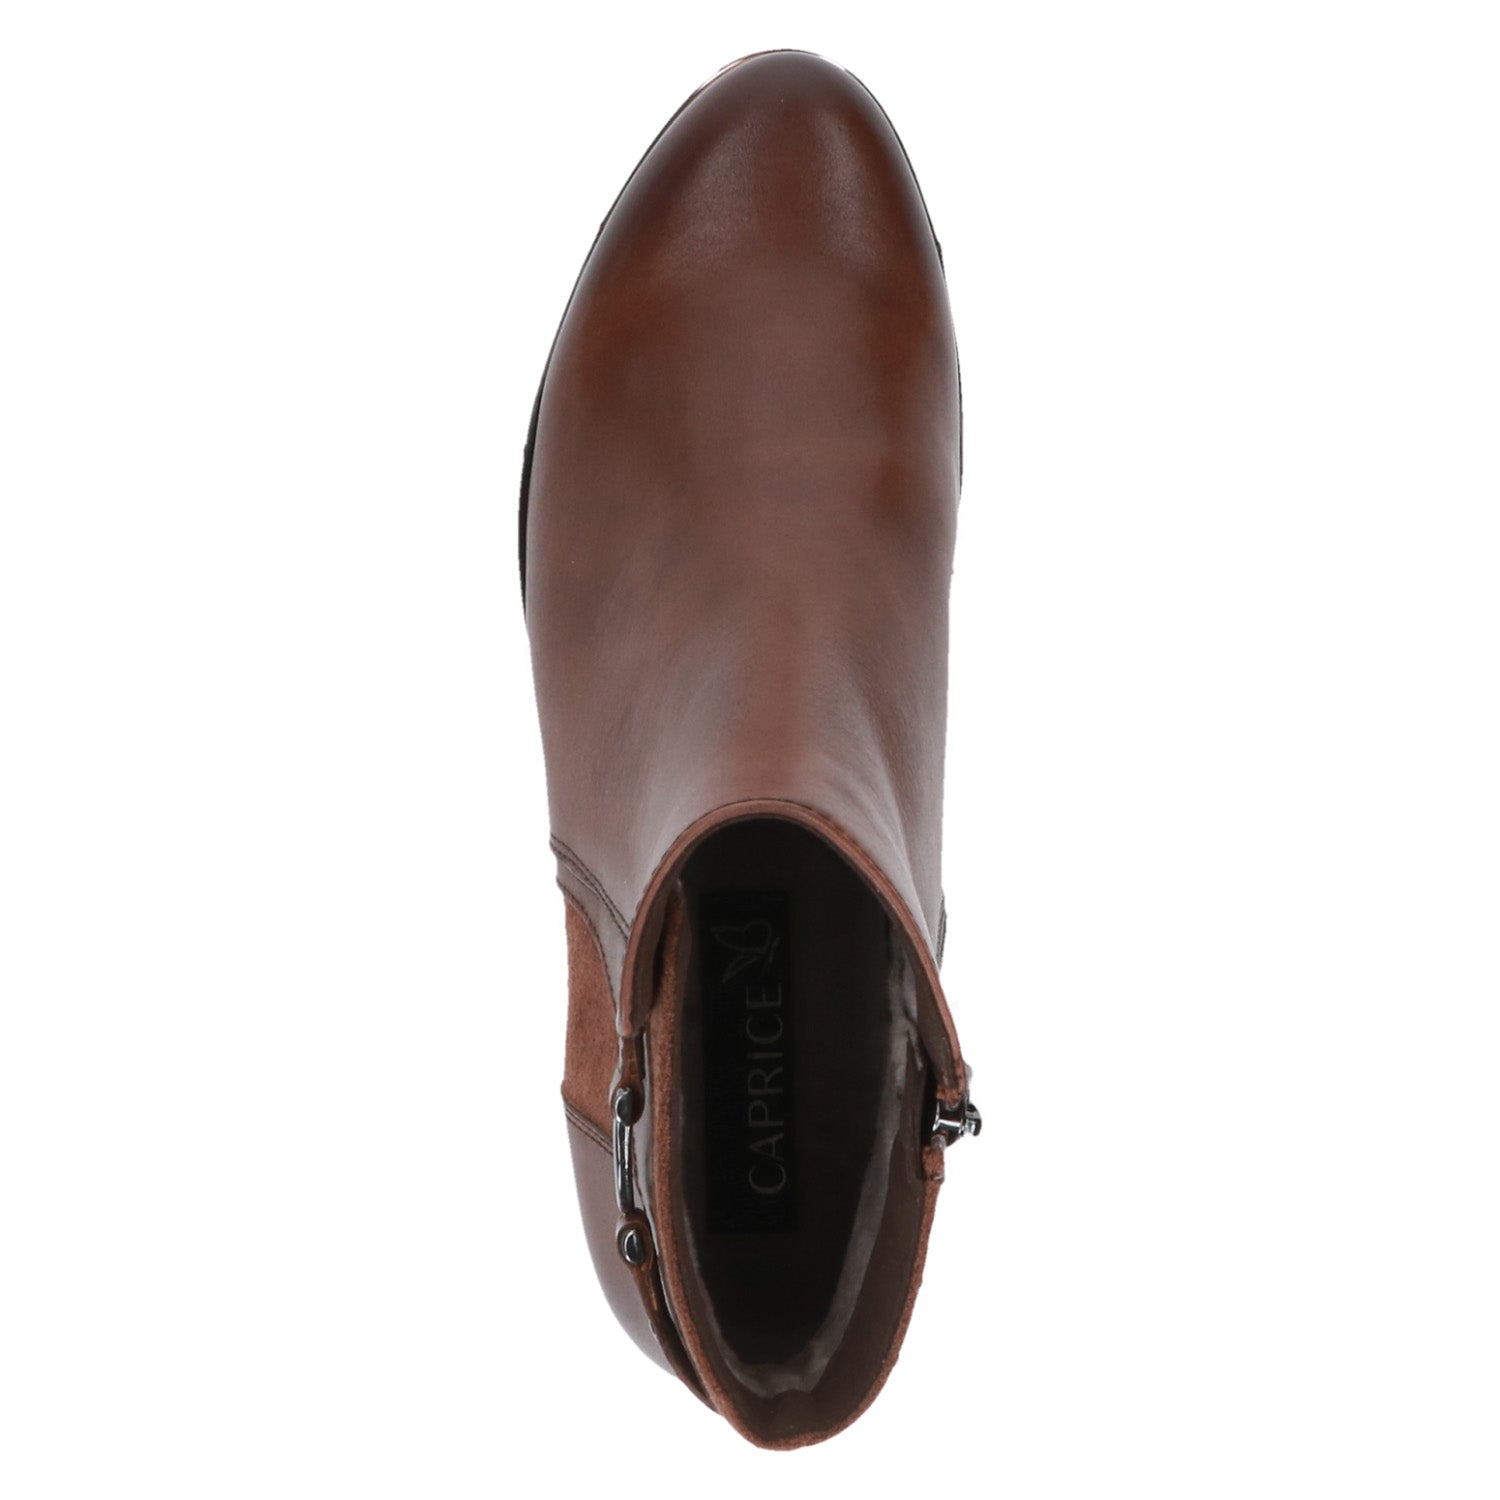 Top view of Caprice Brown Leather Ankle Boot.